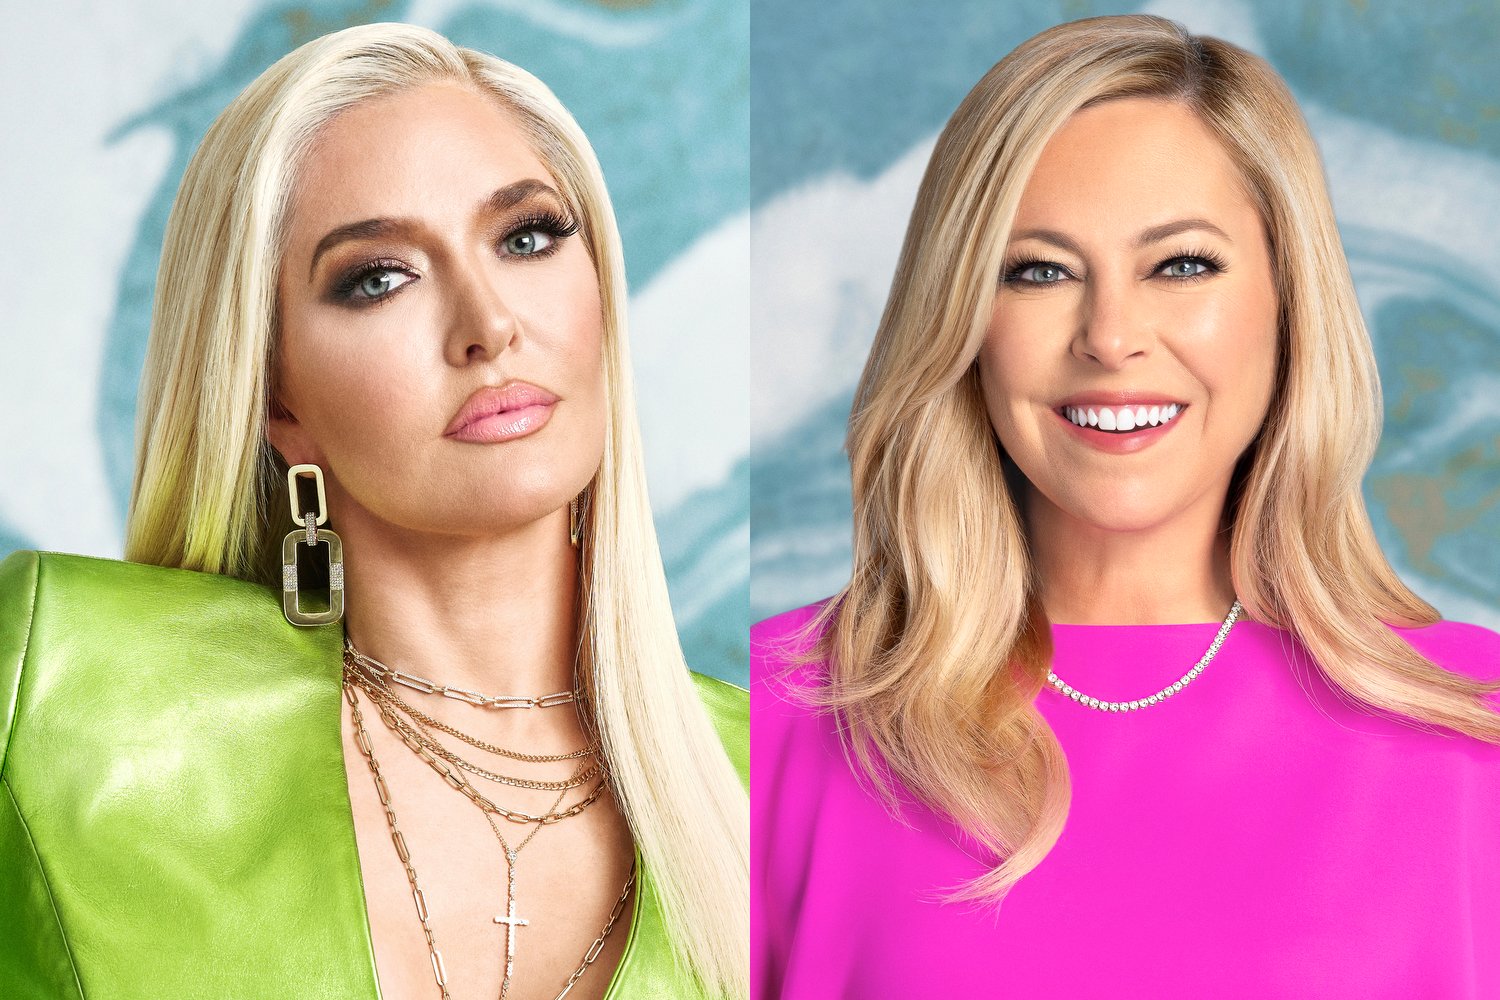 Erika Jayne and Sutton Stracke in their portraits for 'RHOBH' Season 11